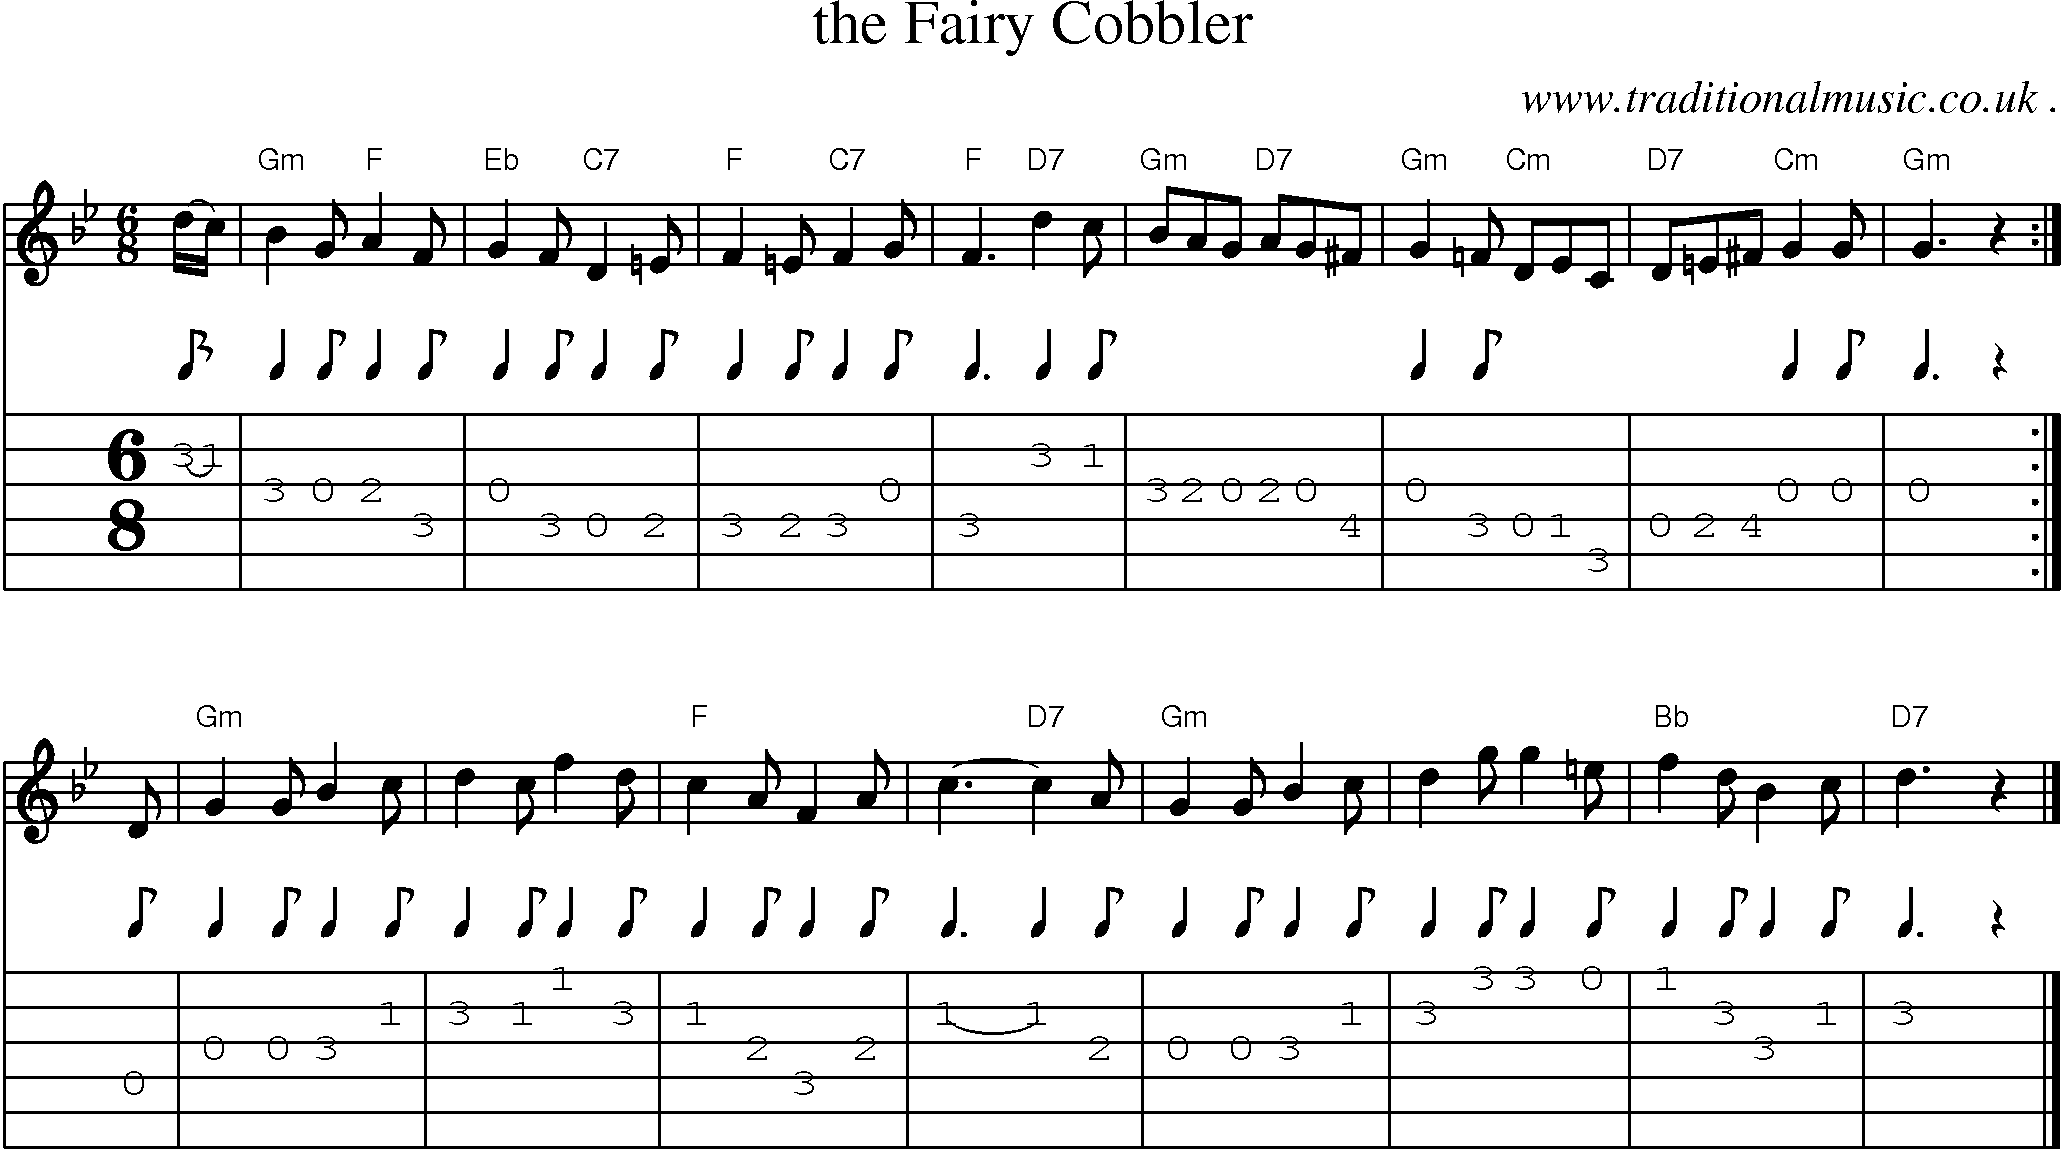 Sheet-music  score, Chords and Guitar Tabs for The Fairy Cobbler